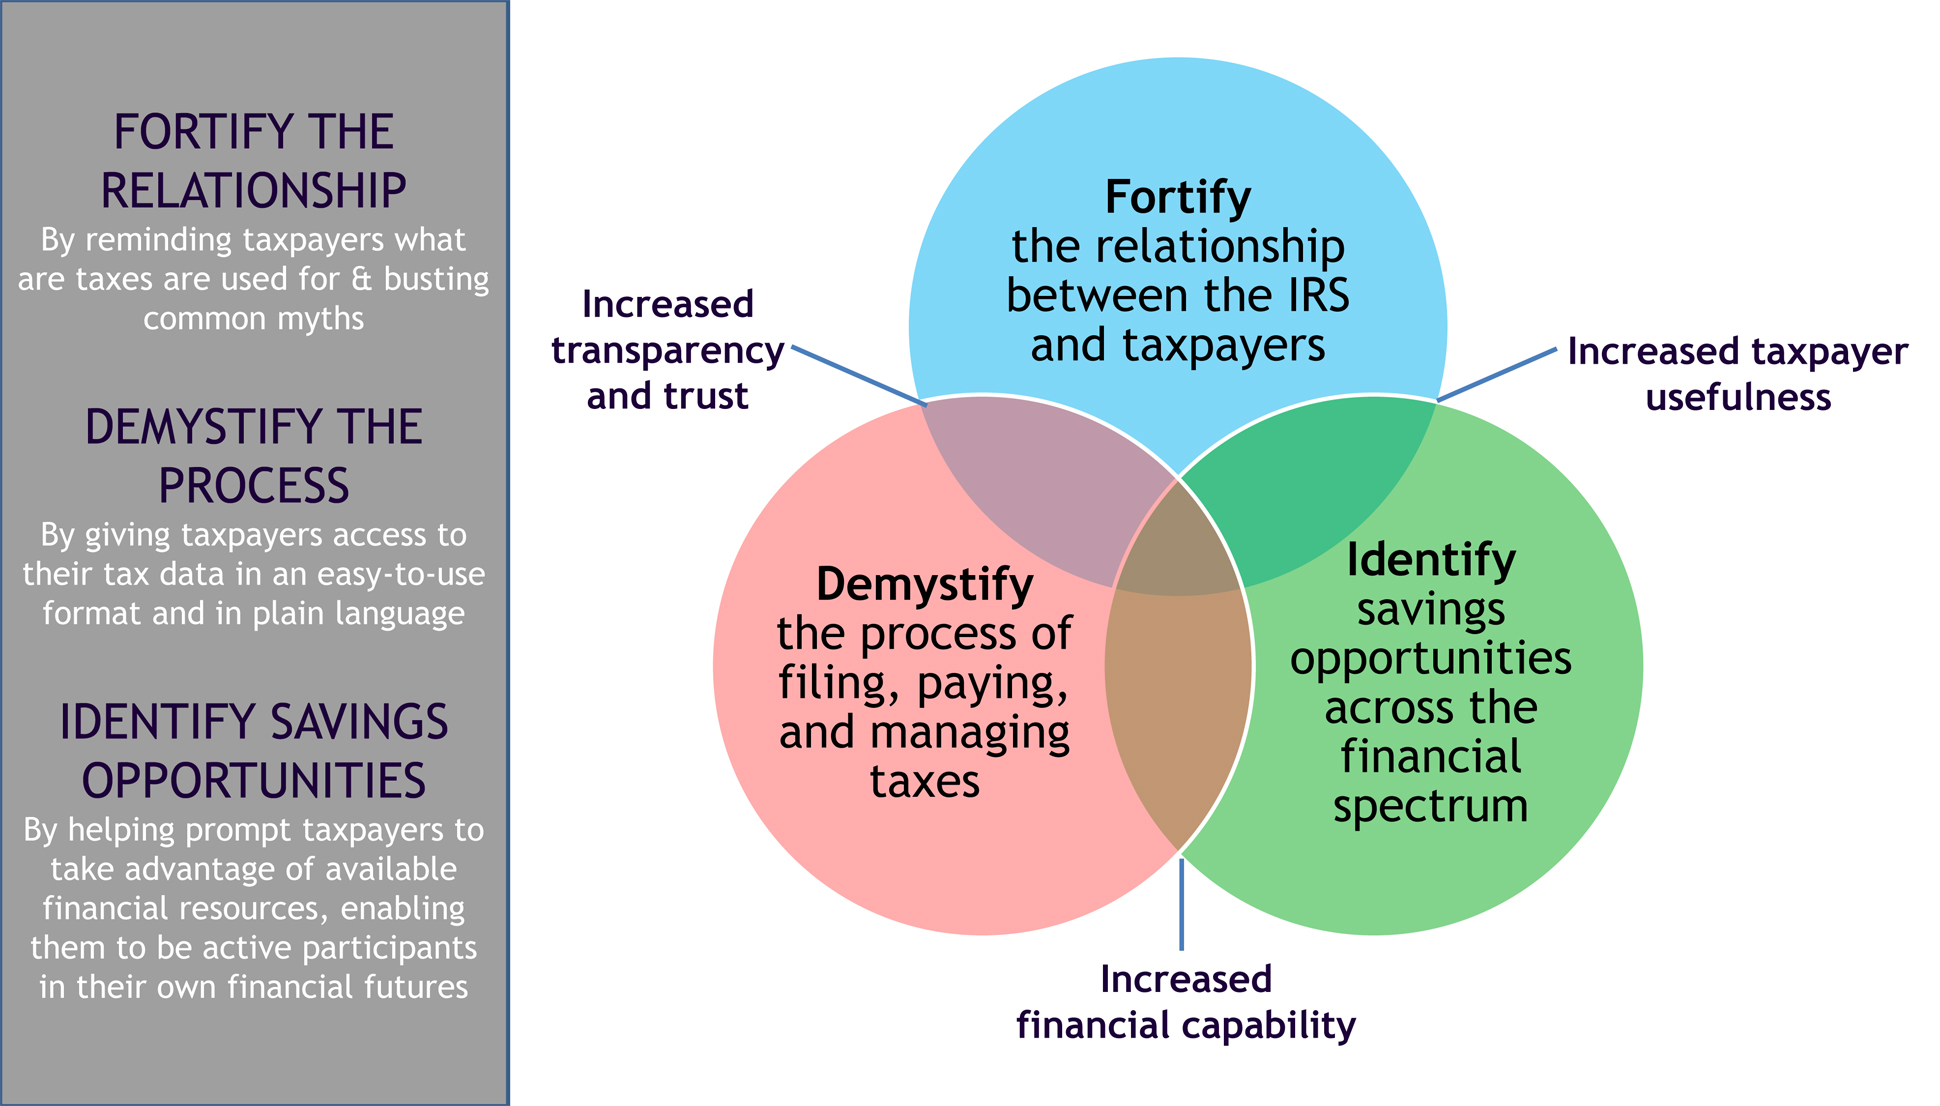 A page from a tax design challenge submission. The submission provides three actions to help the relationship between the taxpayer and the IRS: Fortify the relationship, demystify the process, and identify savings opportunities.